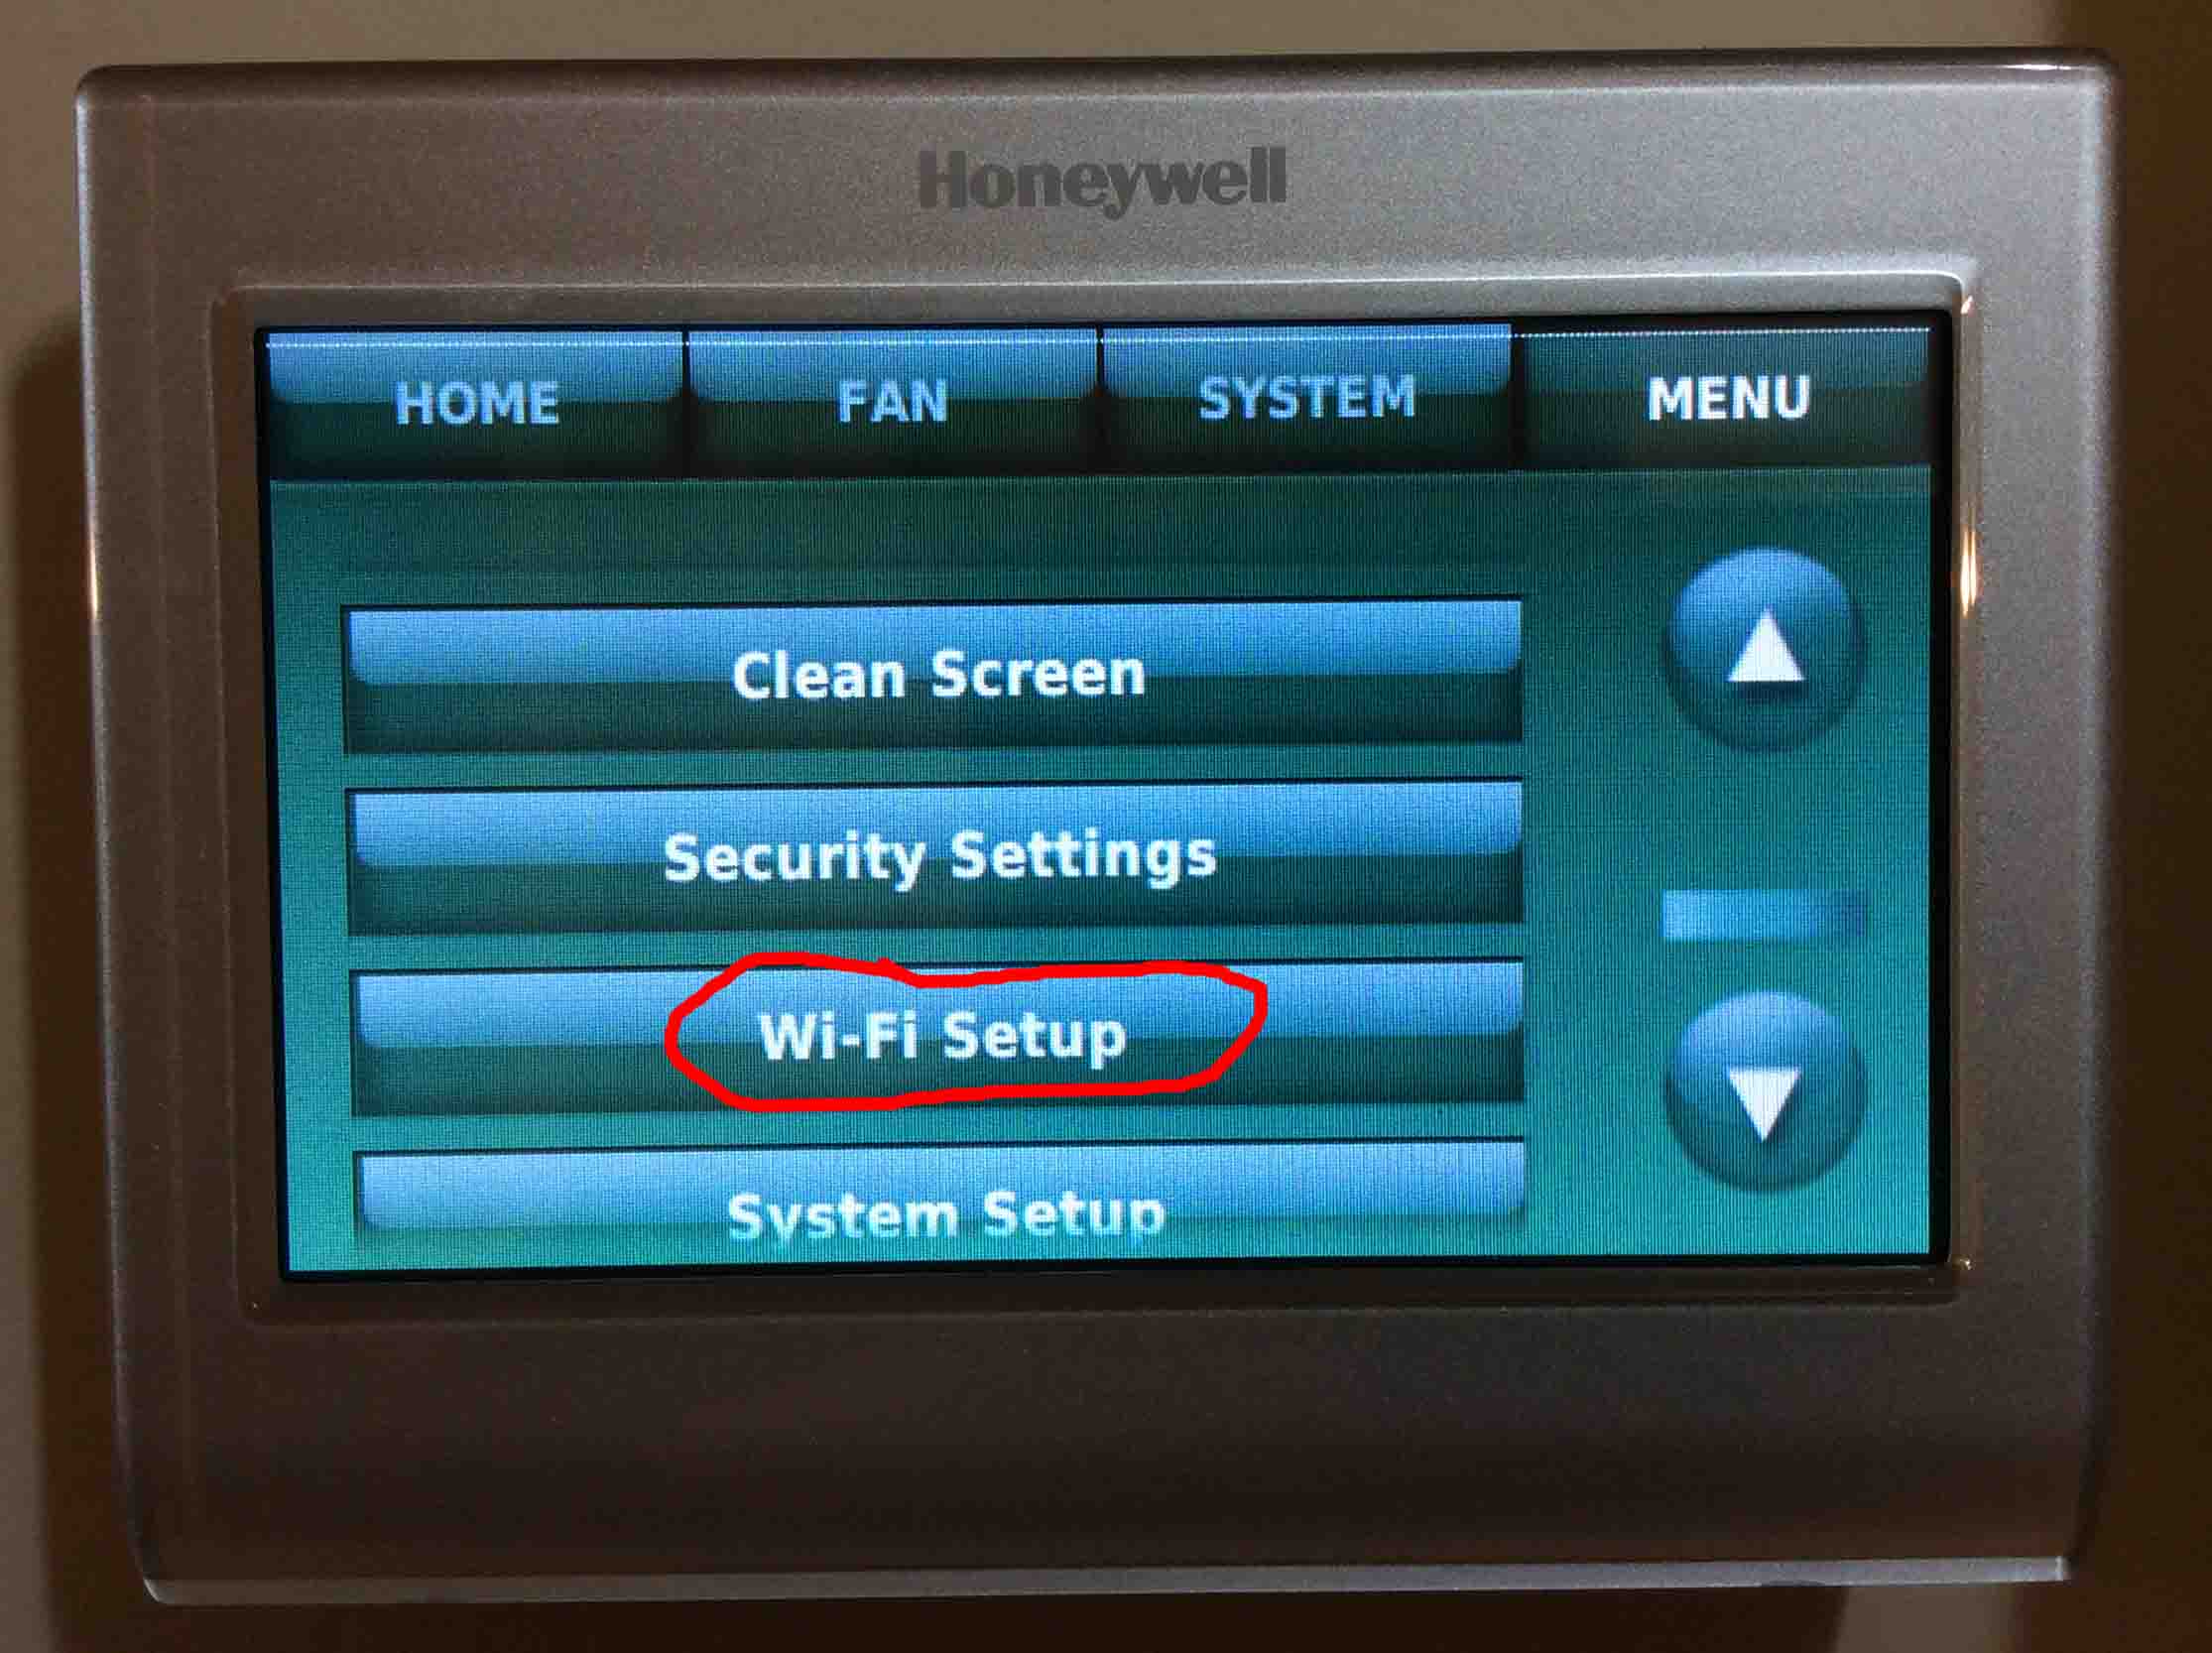 How To Find The MAC Address On A Honeywell Wi-Fi Smart Thermostat